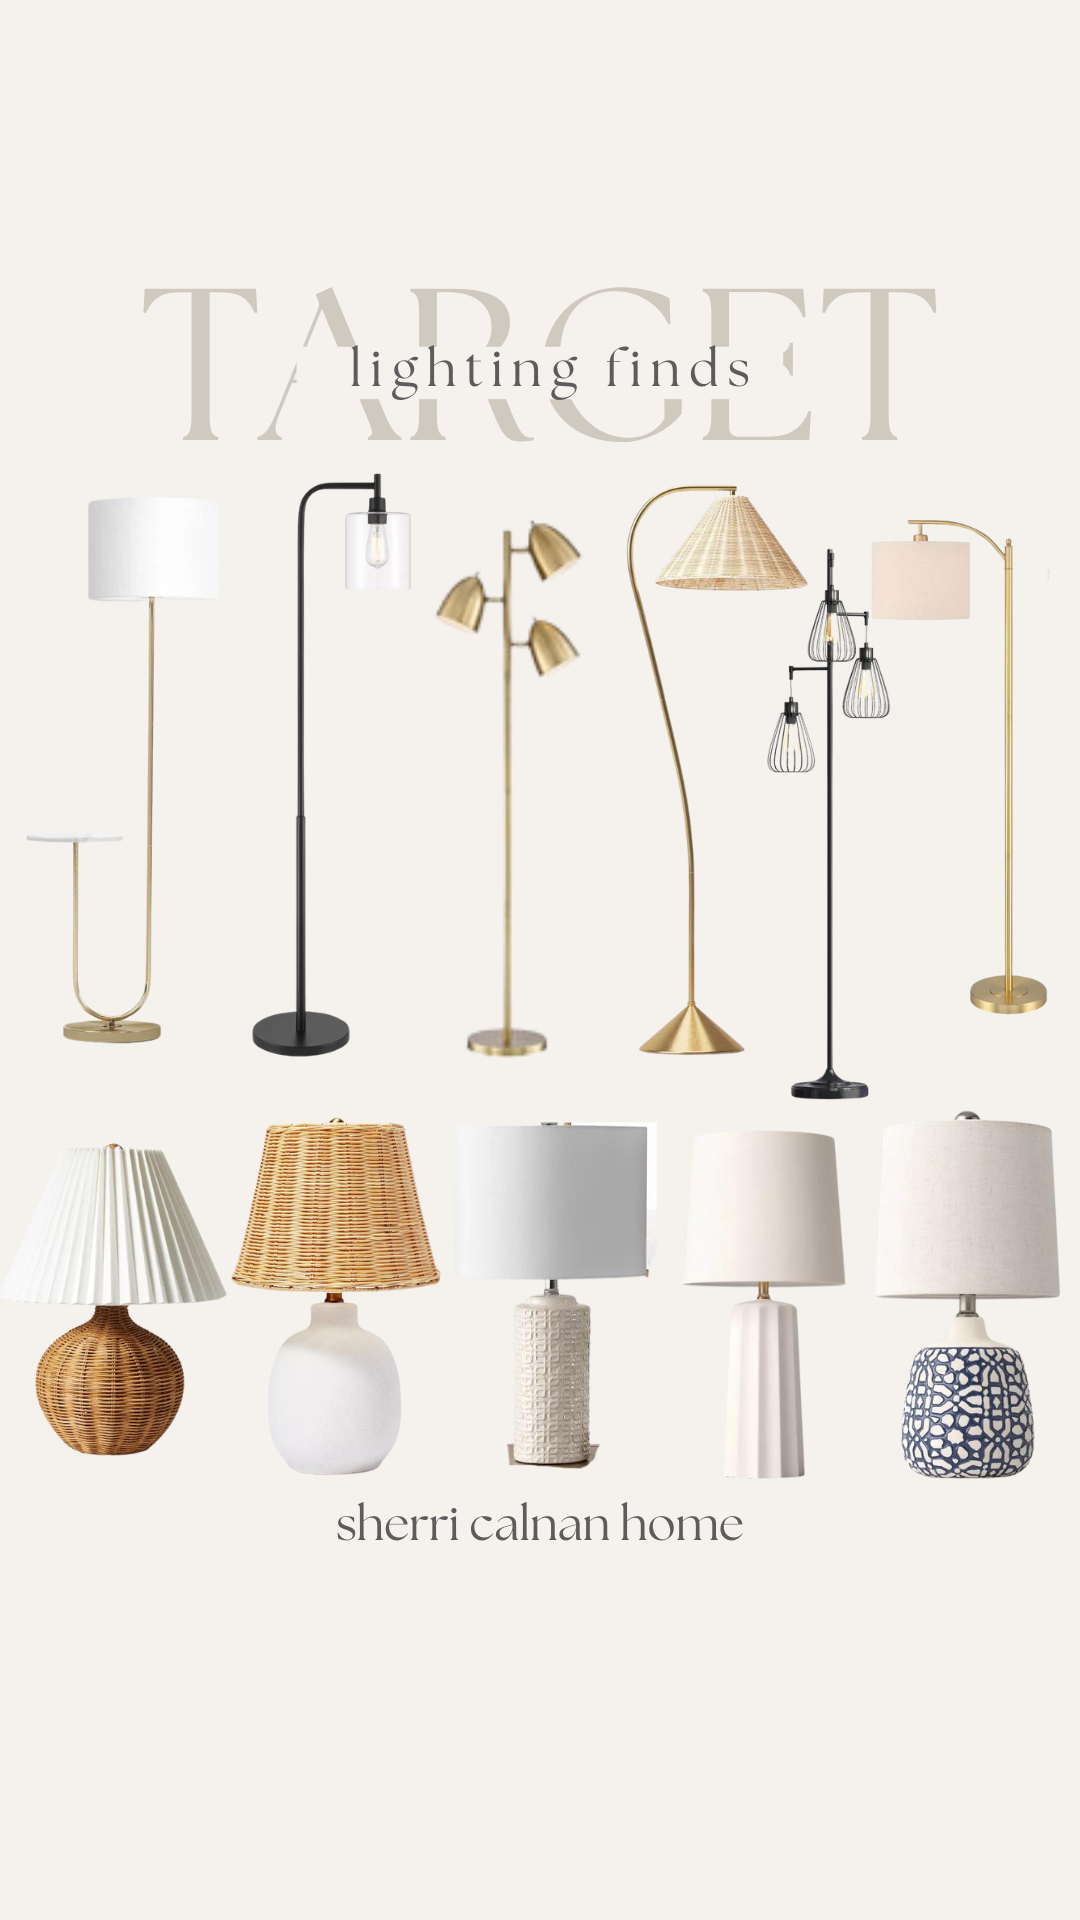 Lighting Round Up, Home lighting, Home decor, modern ambient lighting round-up, Home inspo, Home styling, Home, Lighting collages, lighting finds, home finds, target lighting, large lamps, small lamps, target lamp